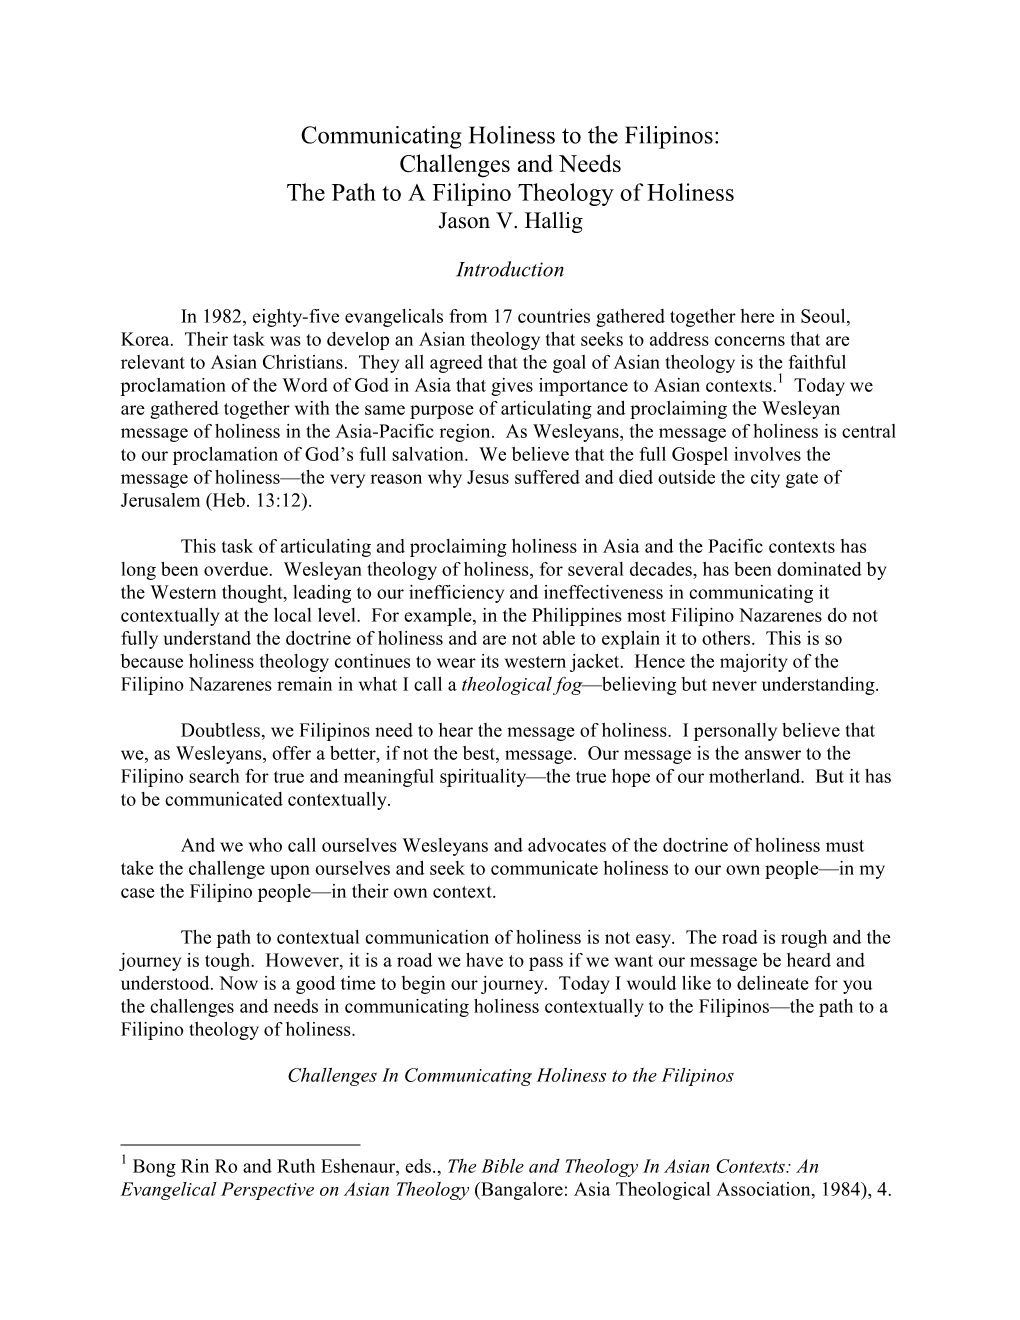 Challenges and Needs the Path to a Filipino Theology of Holiness Jason V